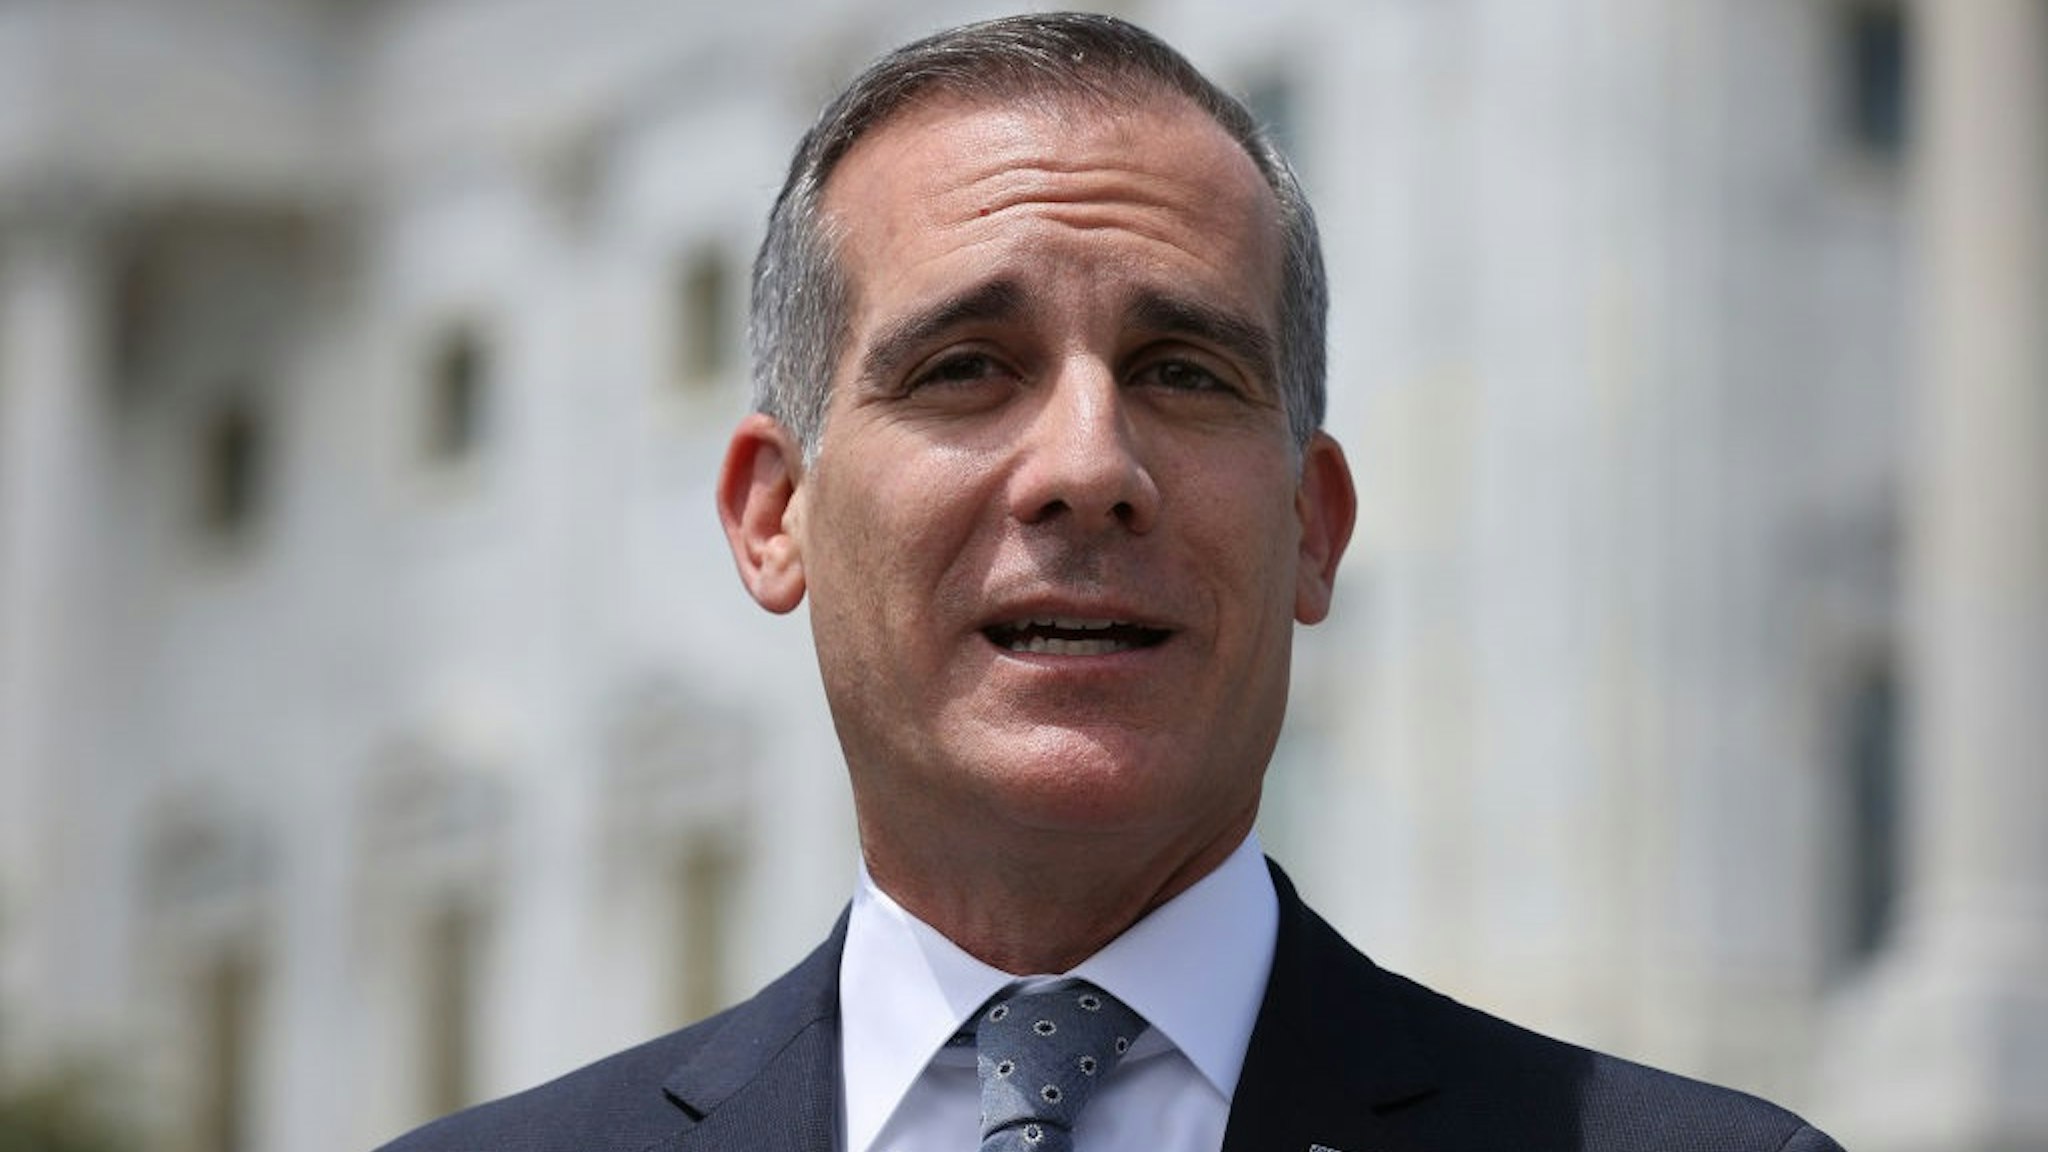 WASHINGTON, DC - MAY 12: Los Angeles Mayor Eric Garcetti speaks about the importance of infrastructure during a news conference with fellow mayors and members of Congress outside the U.S. Capitol on May 12, 2021 in Washington, DC.